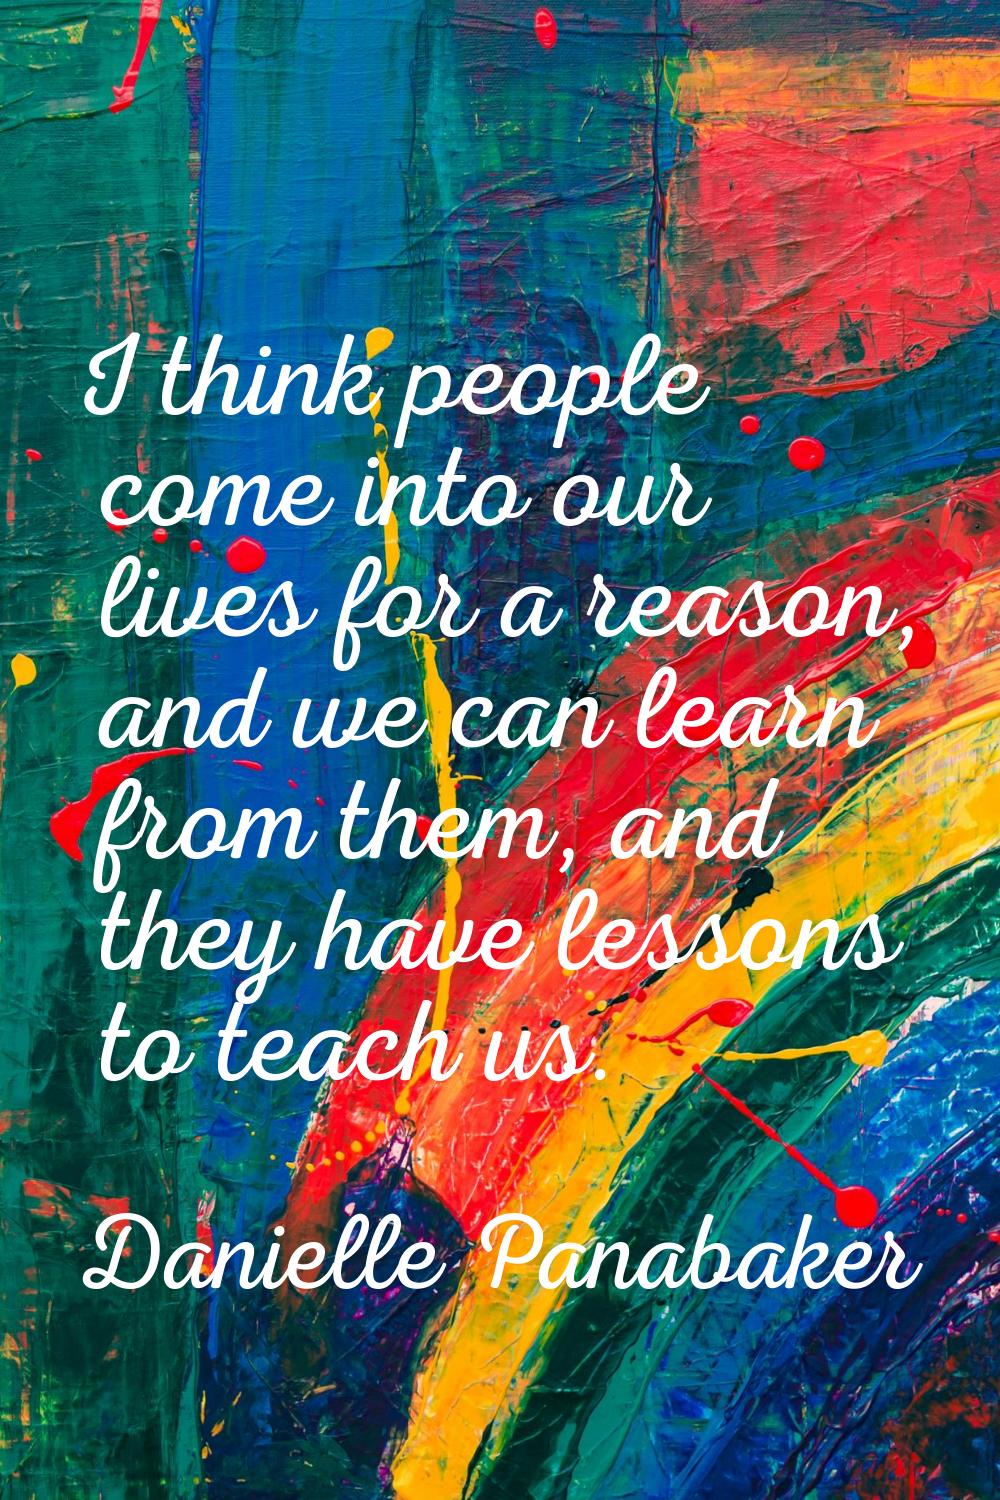 I think people come into our lives for a reason, and we can learn from them, and they have lessons 